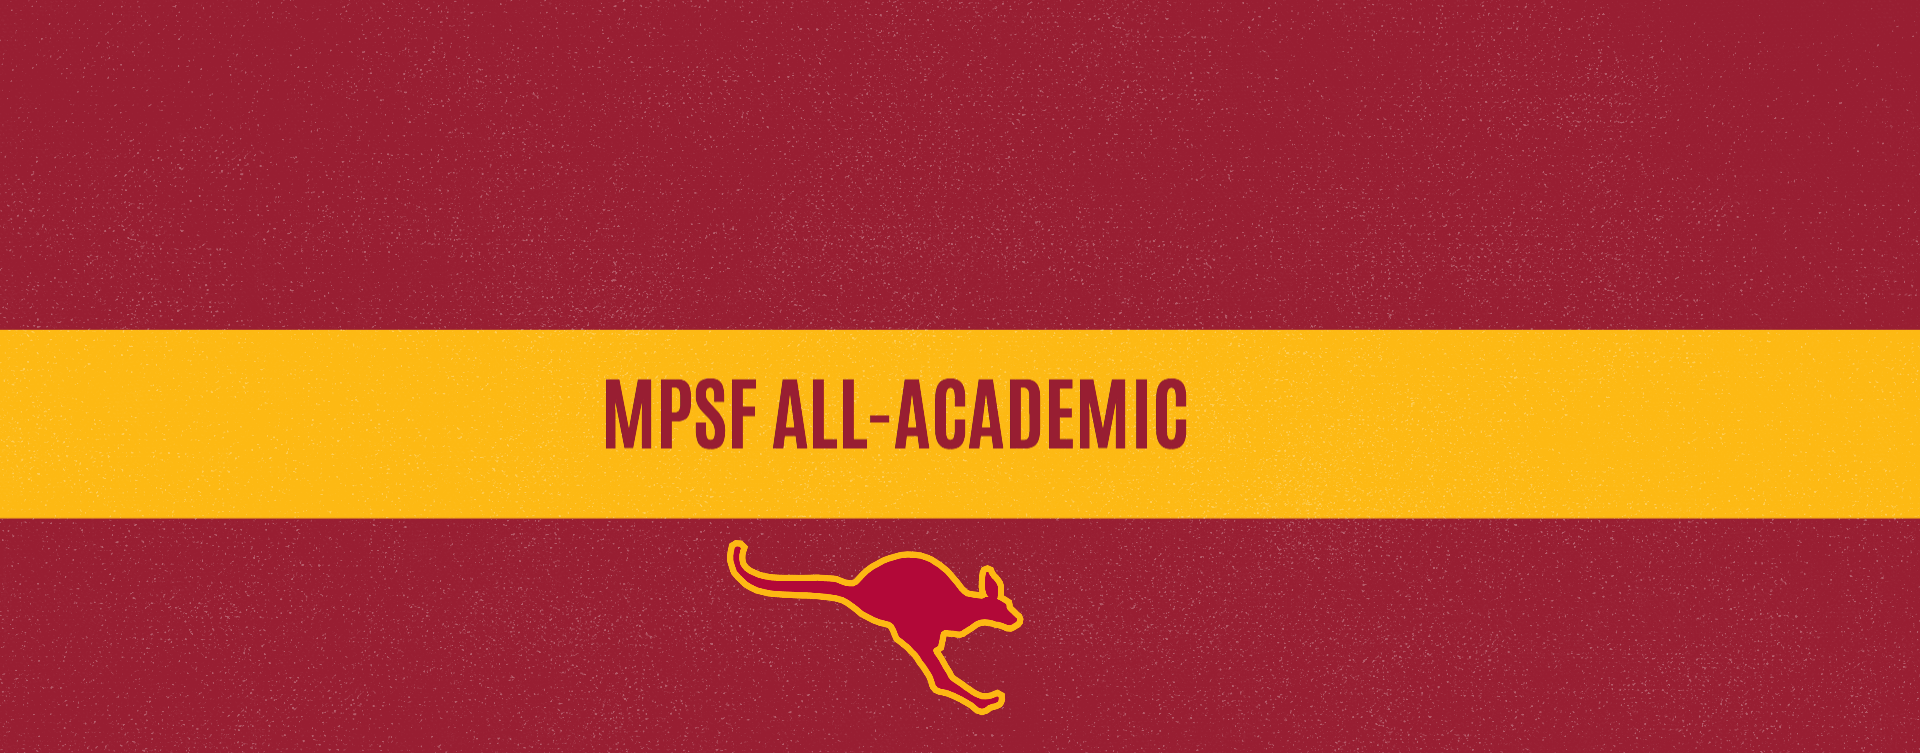 Nine From 'Roo Water Polo Earn MPSF All-Academic